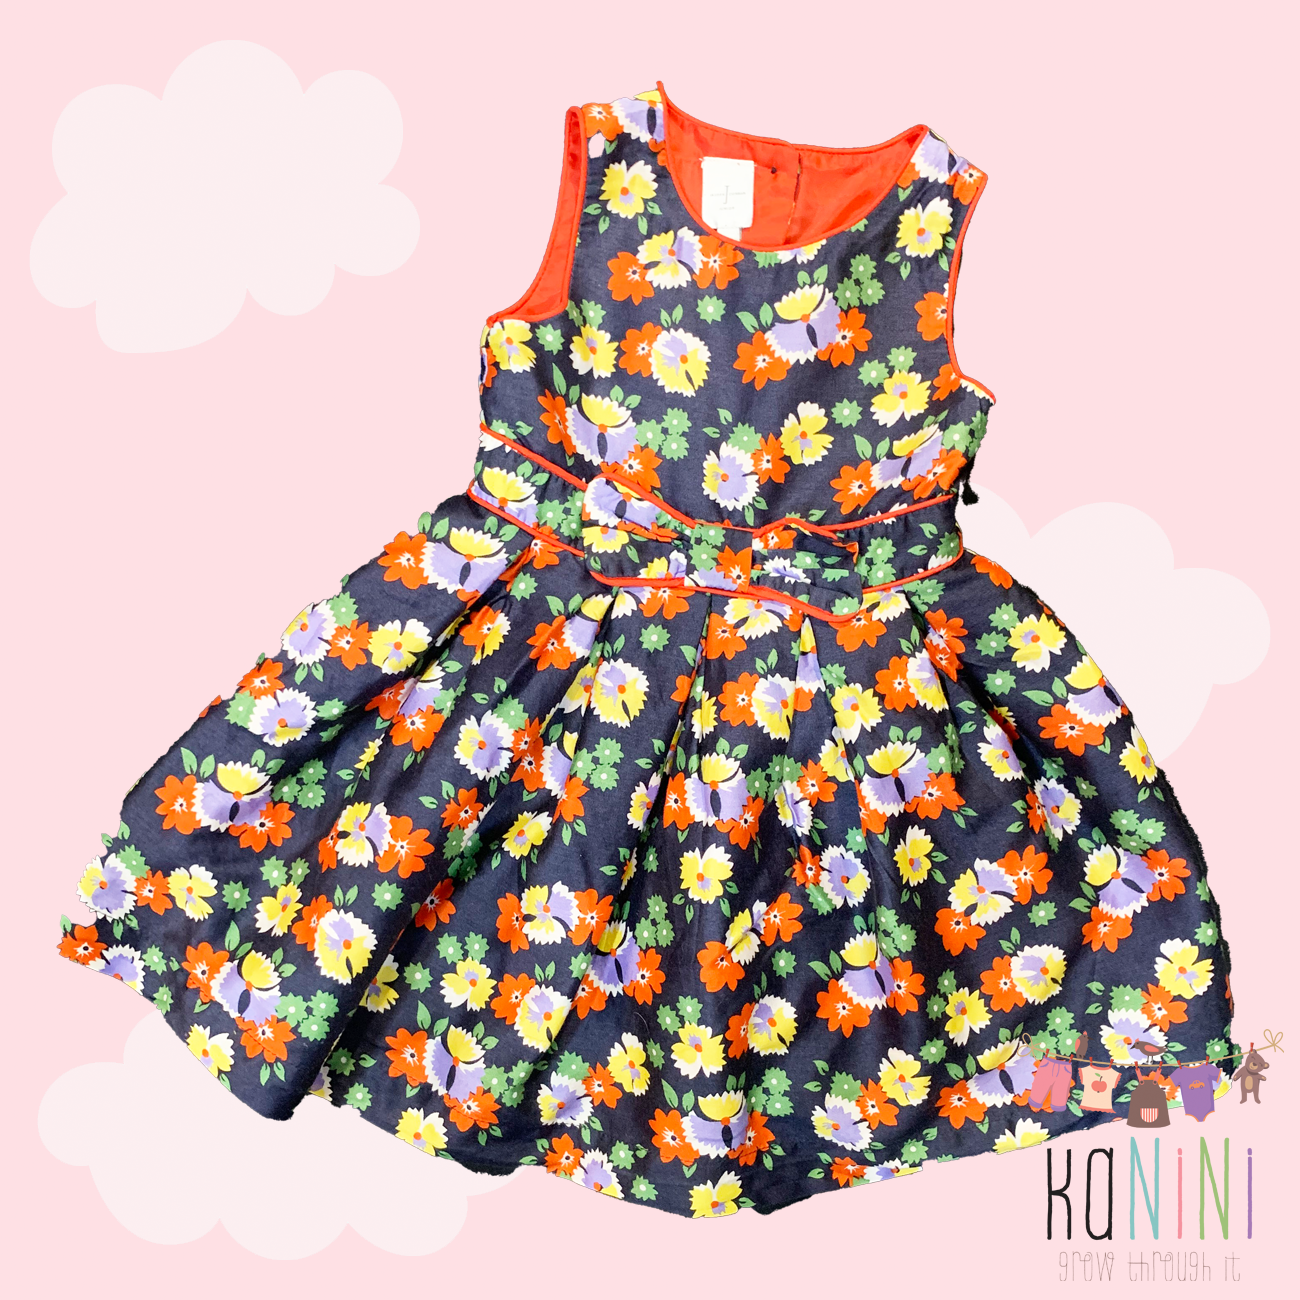 Featured image for “Jasper Conran Jnr 2-3 Years Girls Party Dress”